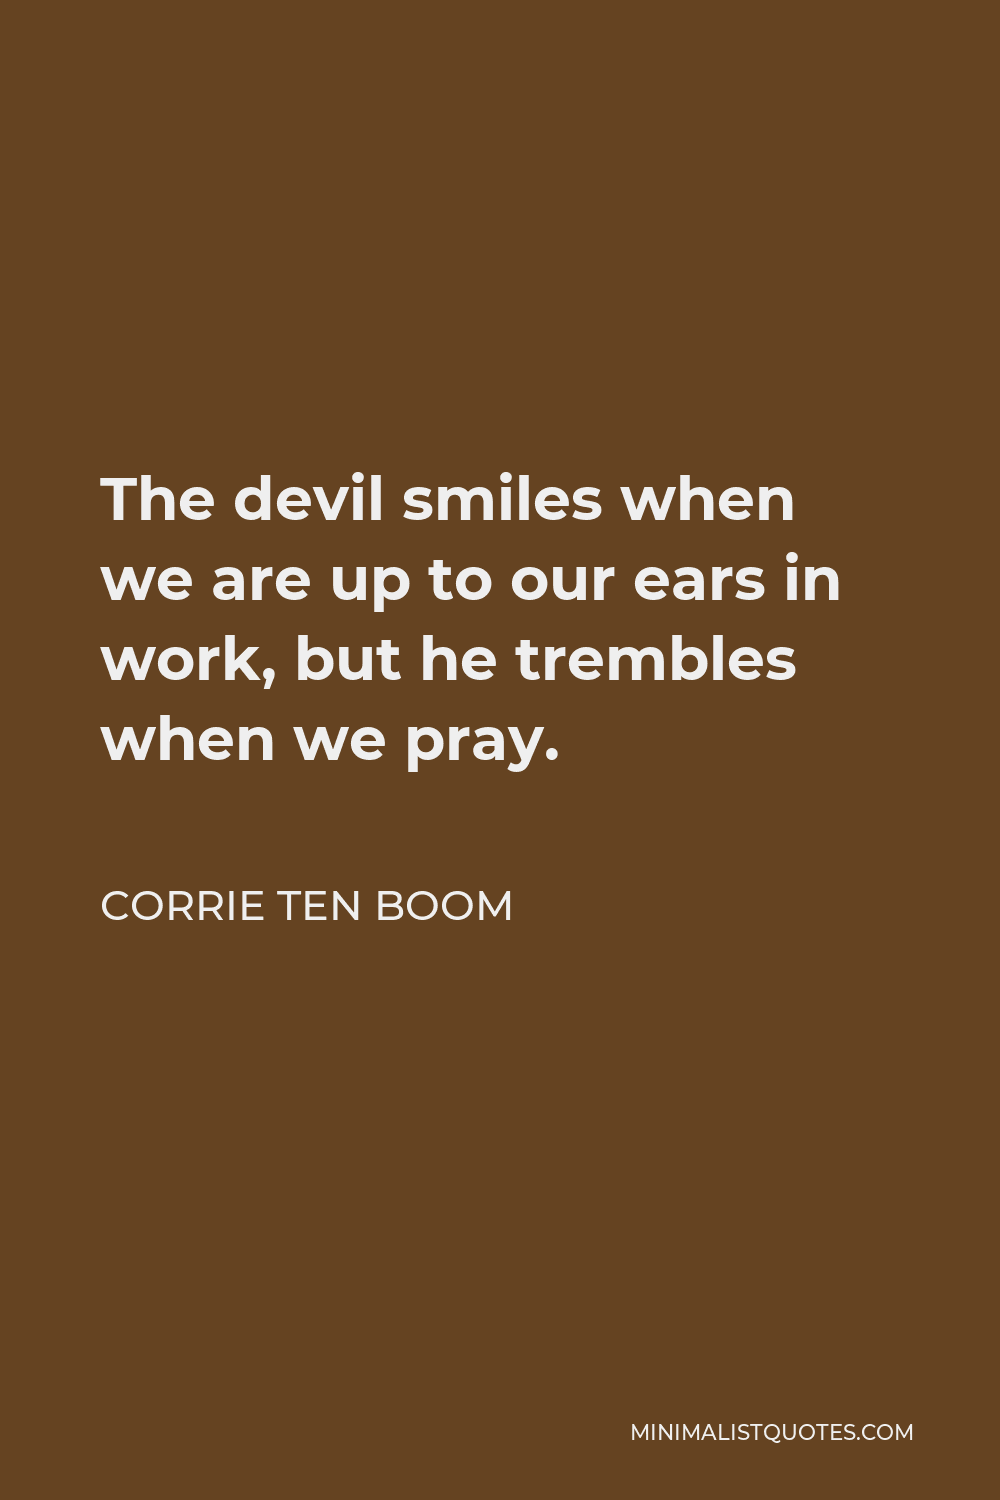 Corrie ten Boom Quote - The devil smiles when we are up to our ears in work, but he trembles when we pray.